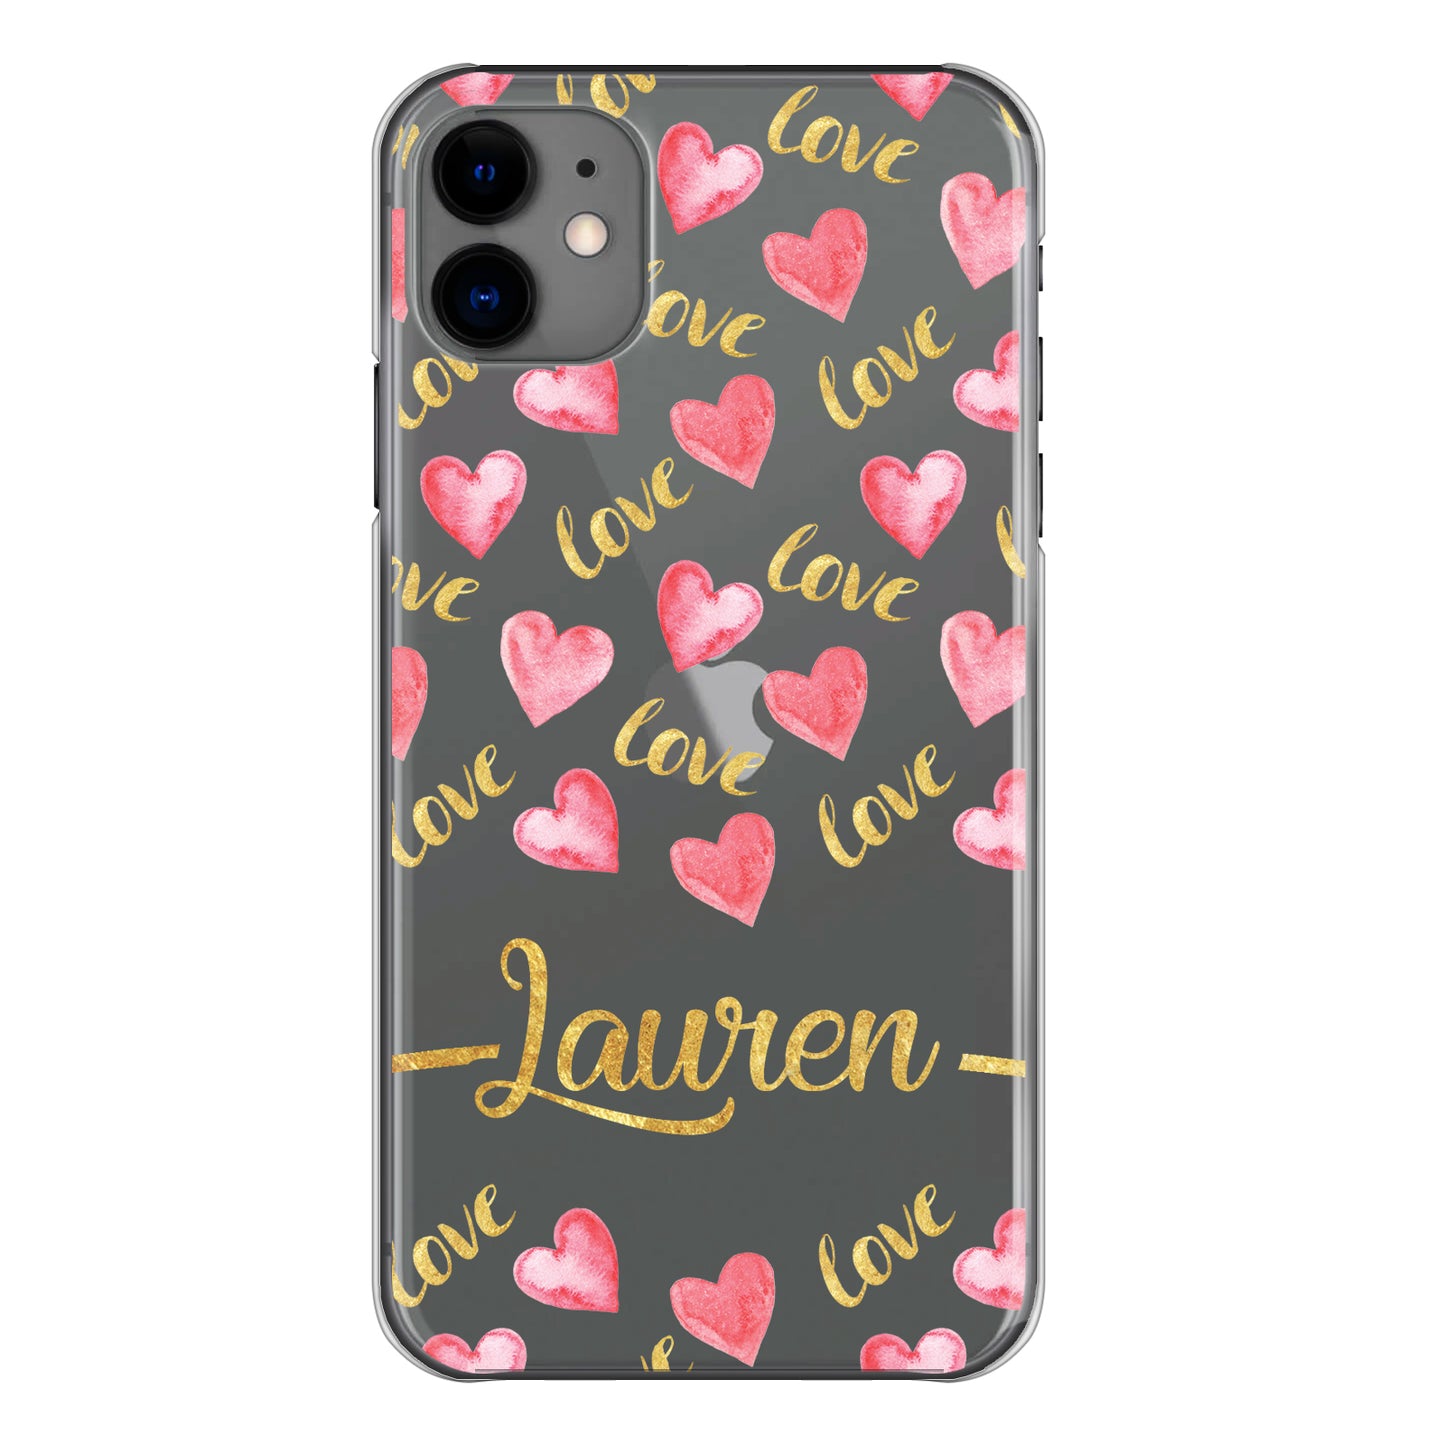 Personalised HTC Phone Hard Case with Love Hearts and Cute Gold Text